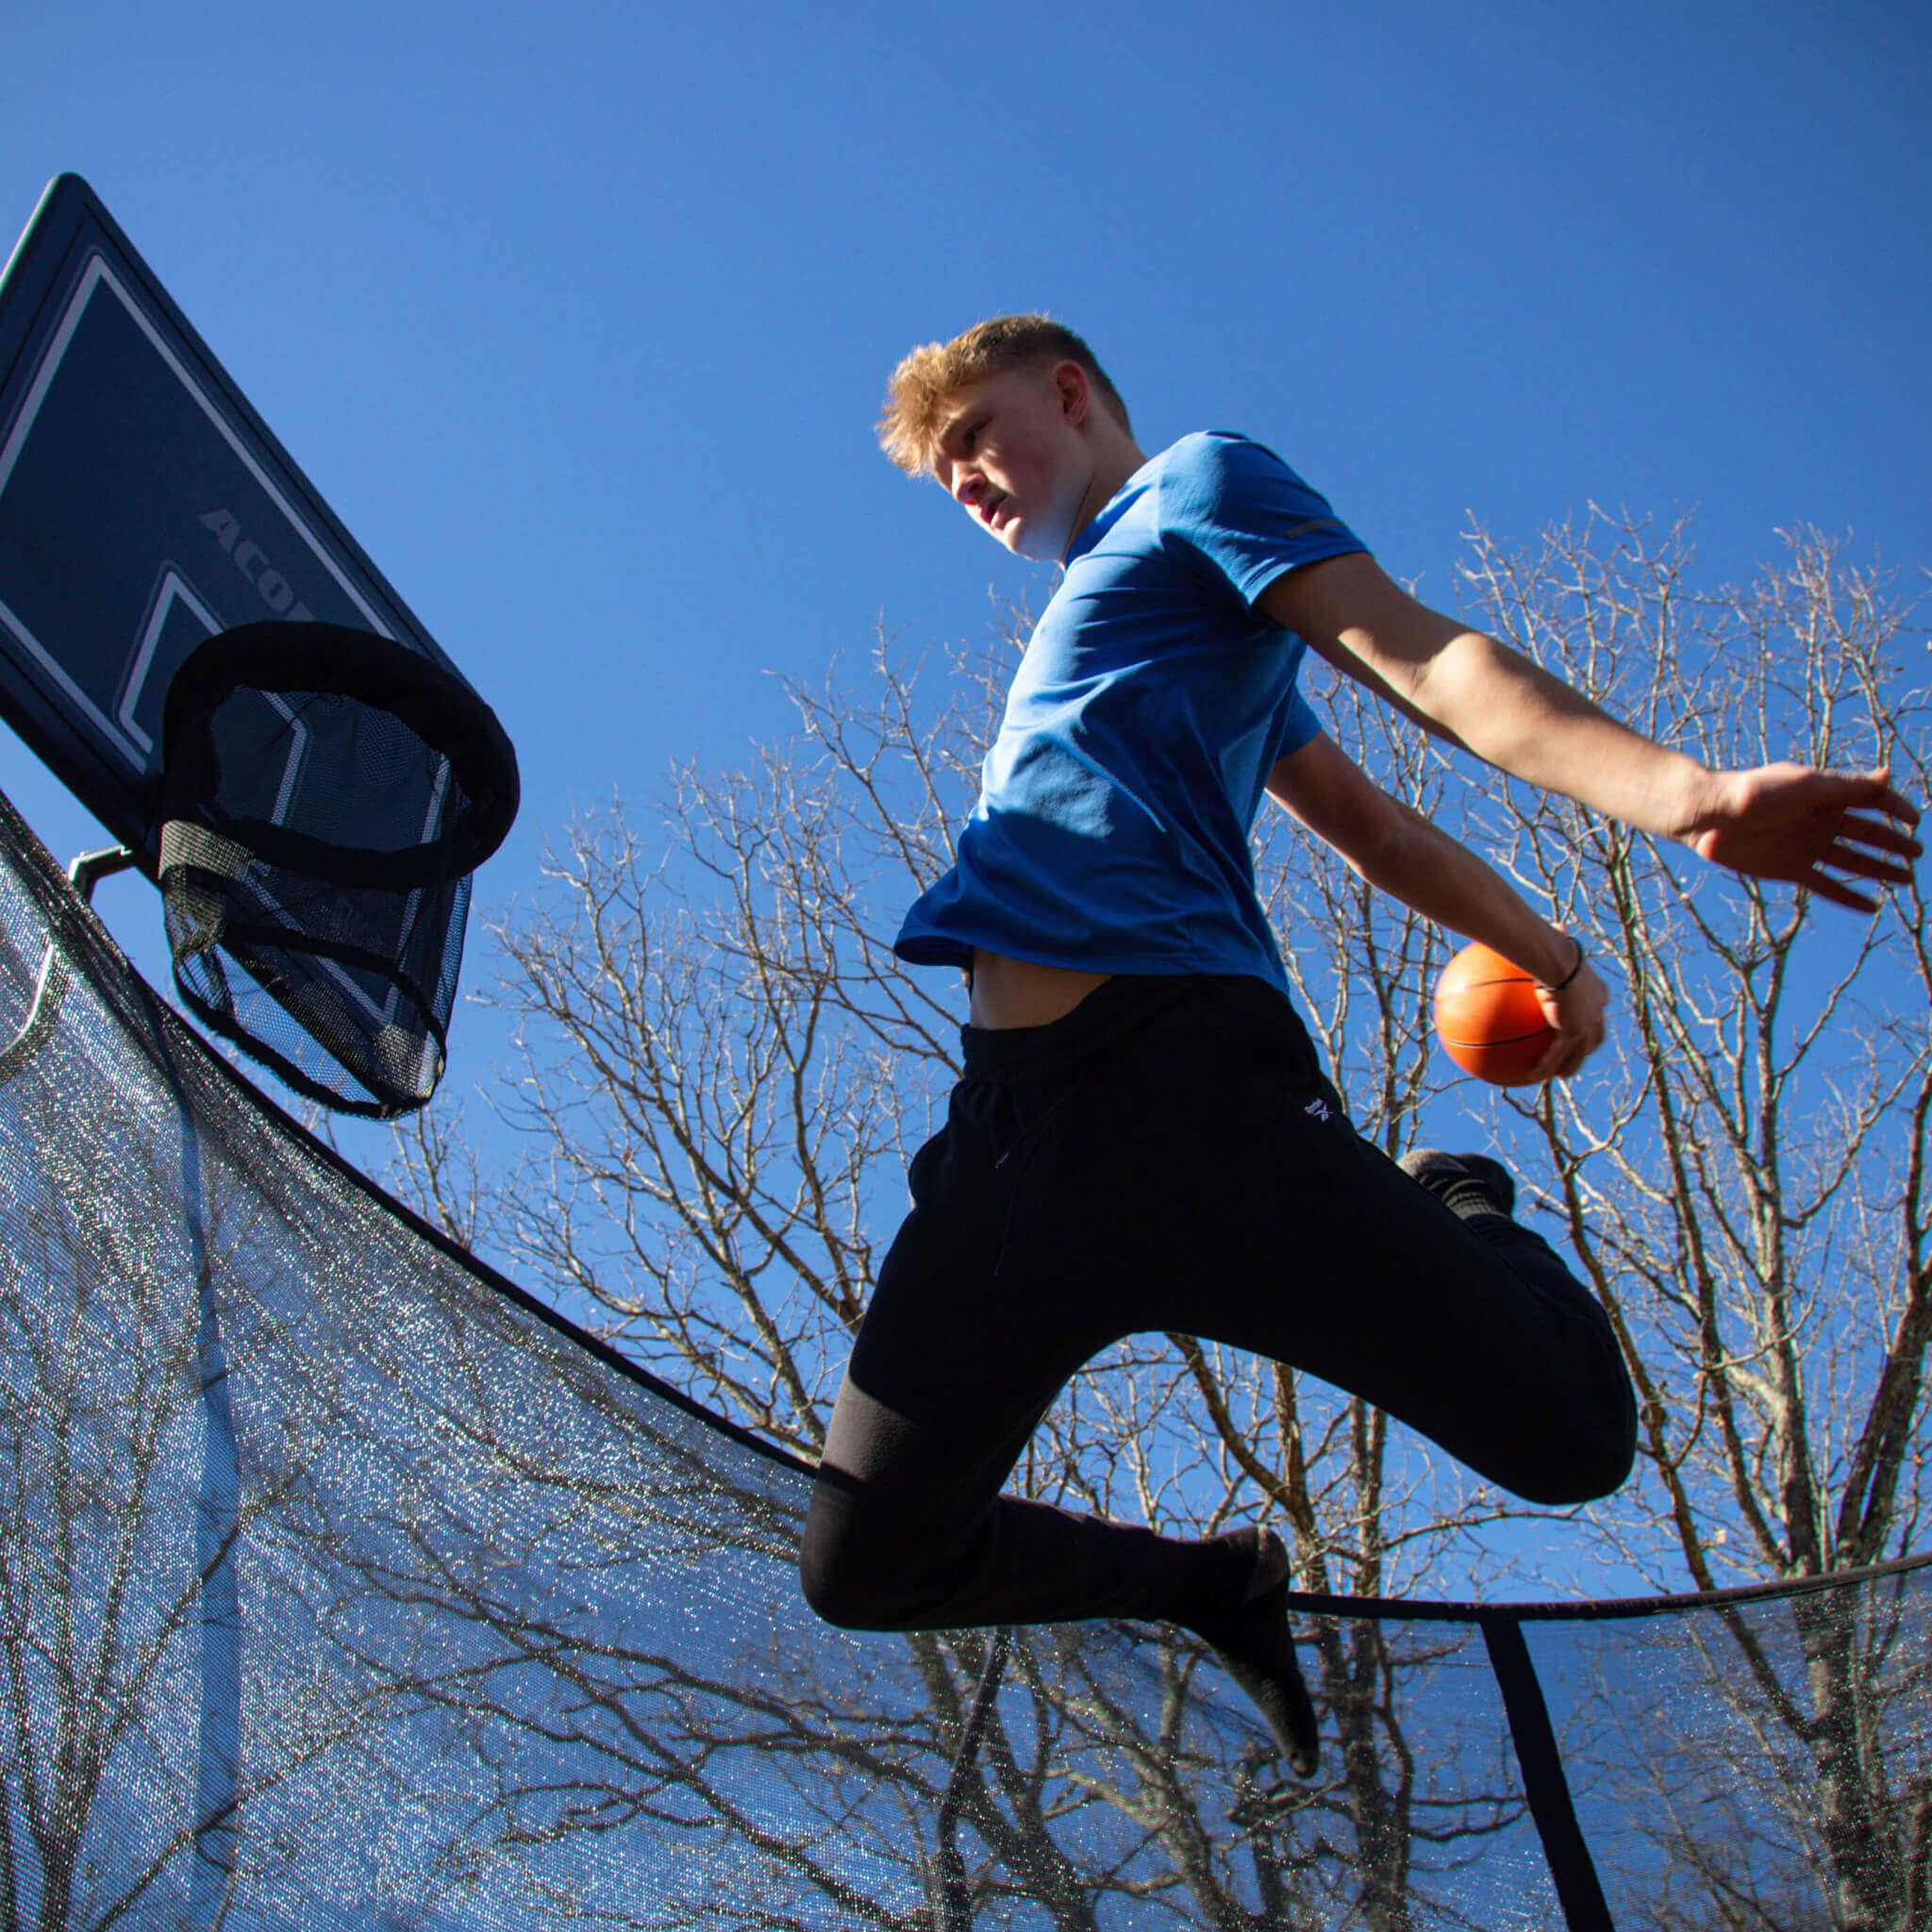 Basketball player on a round trampoline.